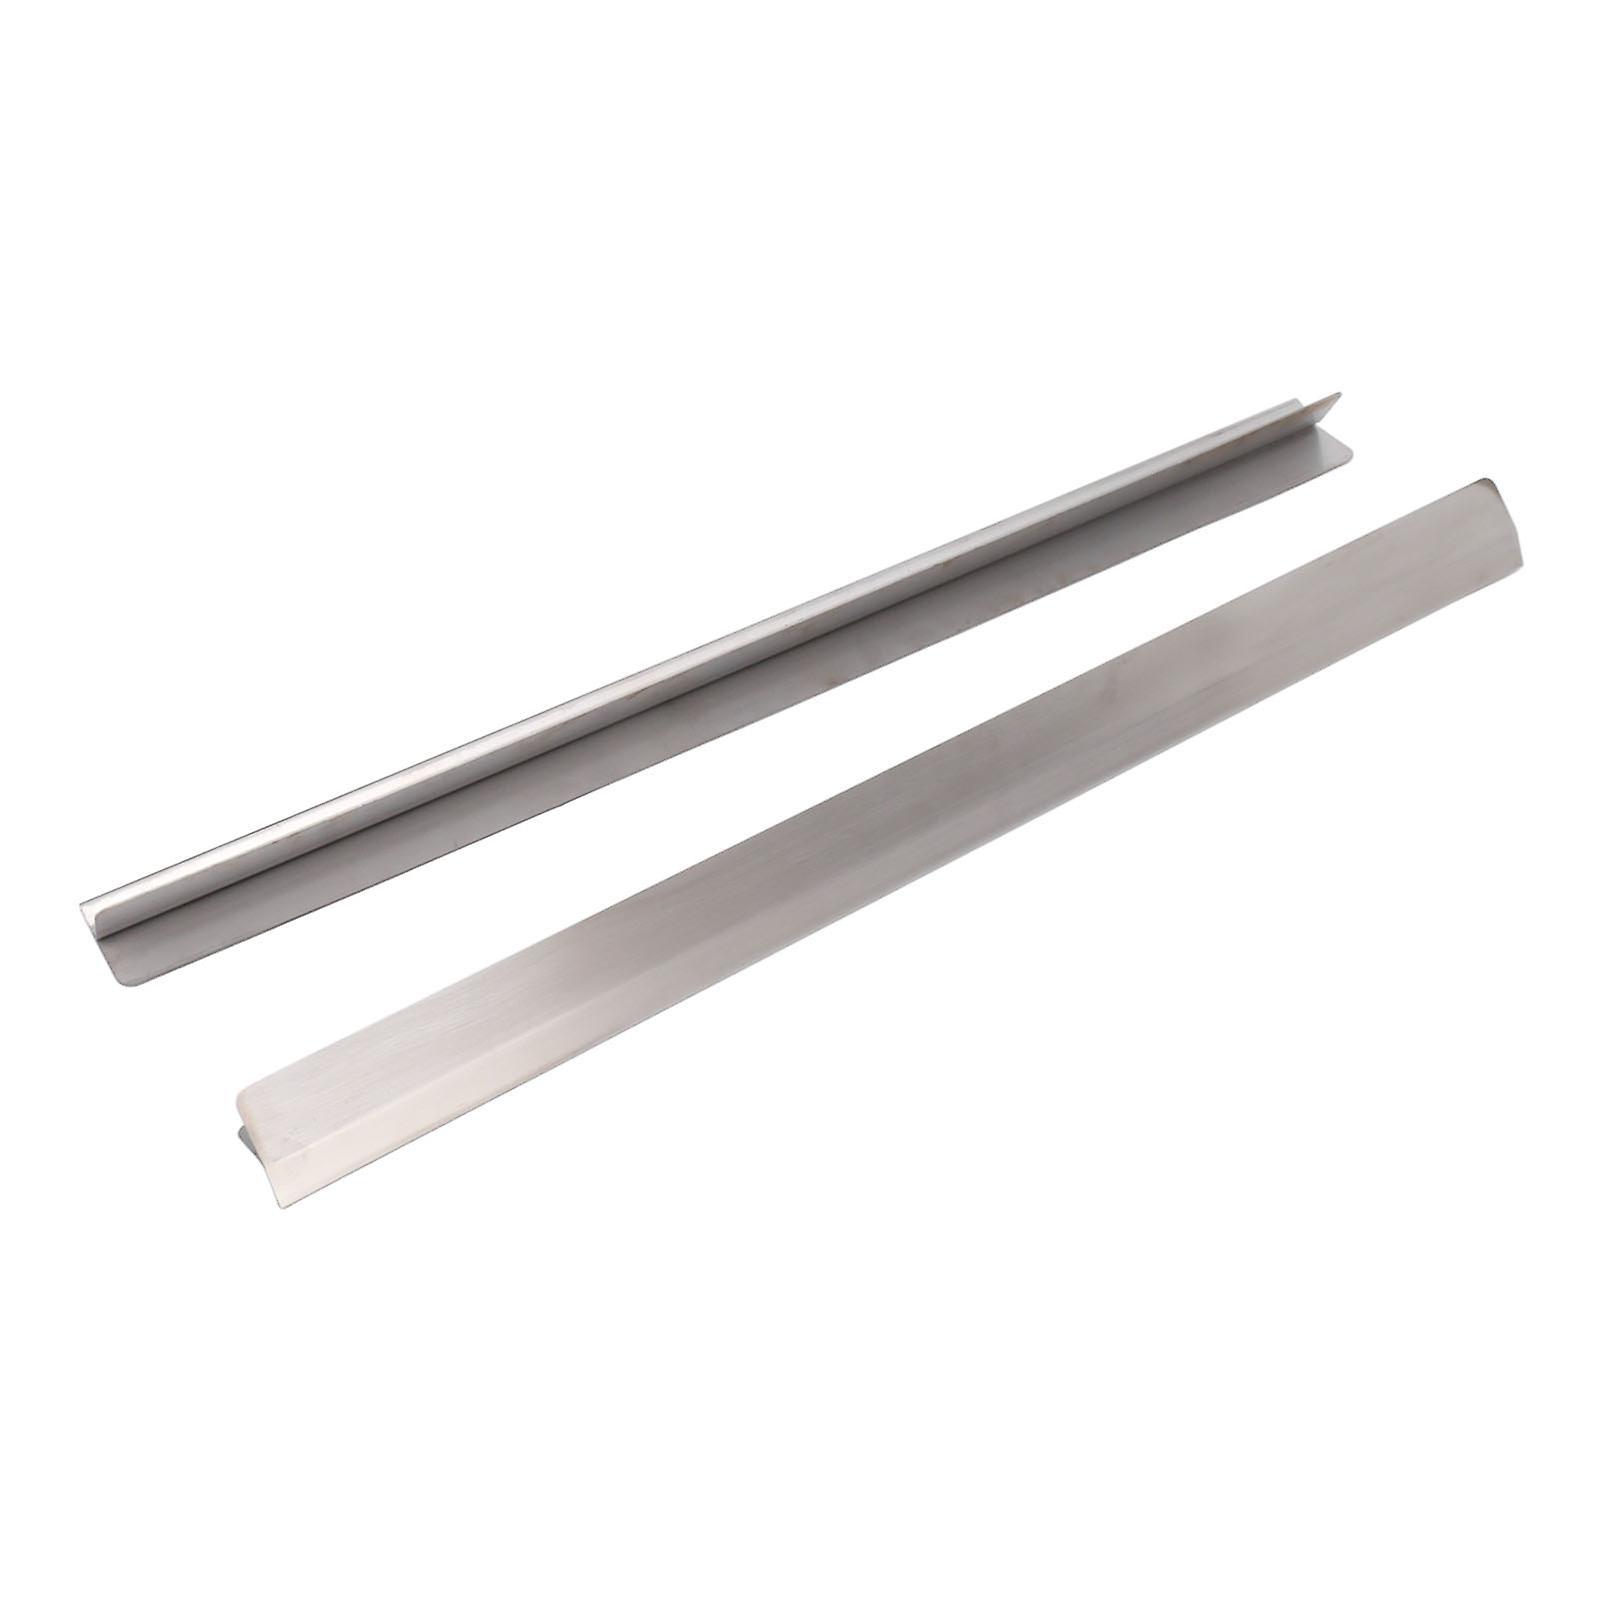 2PCS Kitchen Stove Counter Gap Cover Easy Cleaning Stainless Steel Gap Cover for Kitchen Supplies